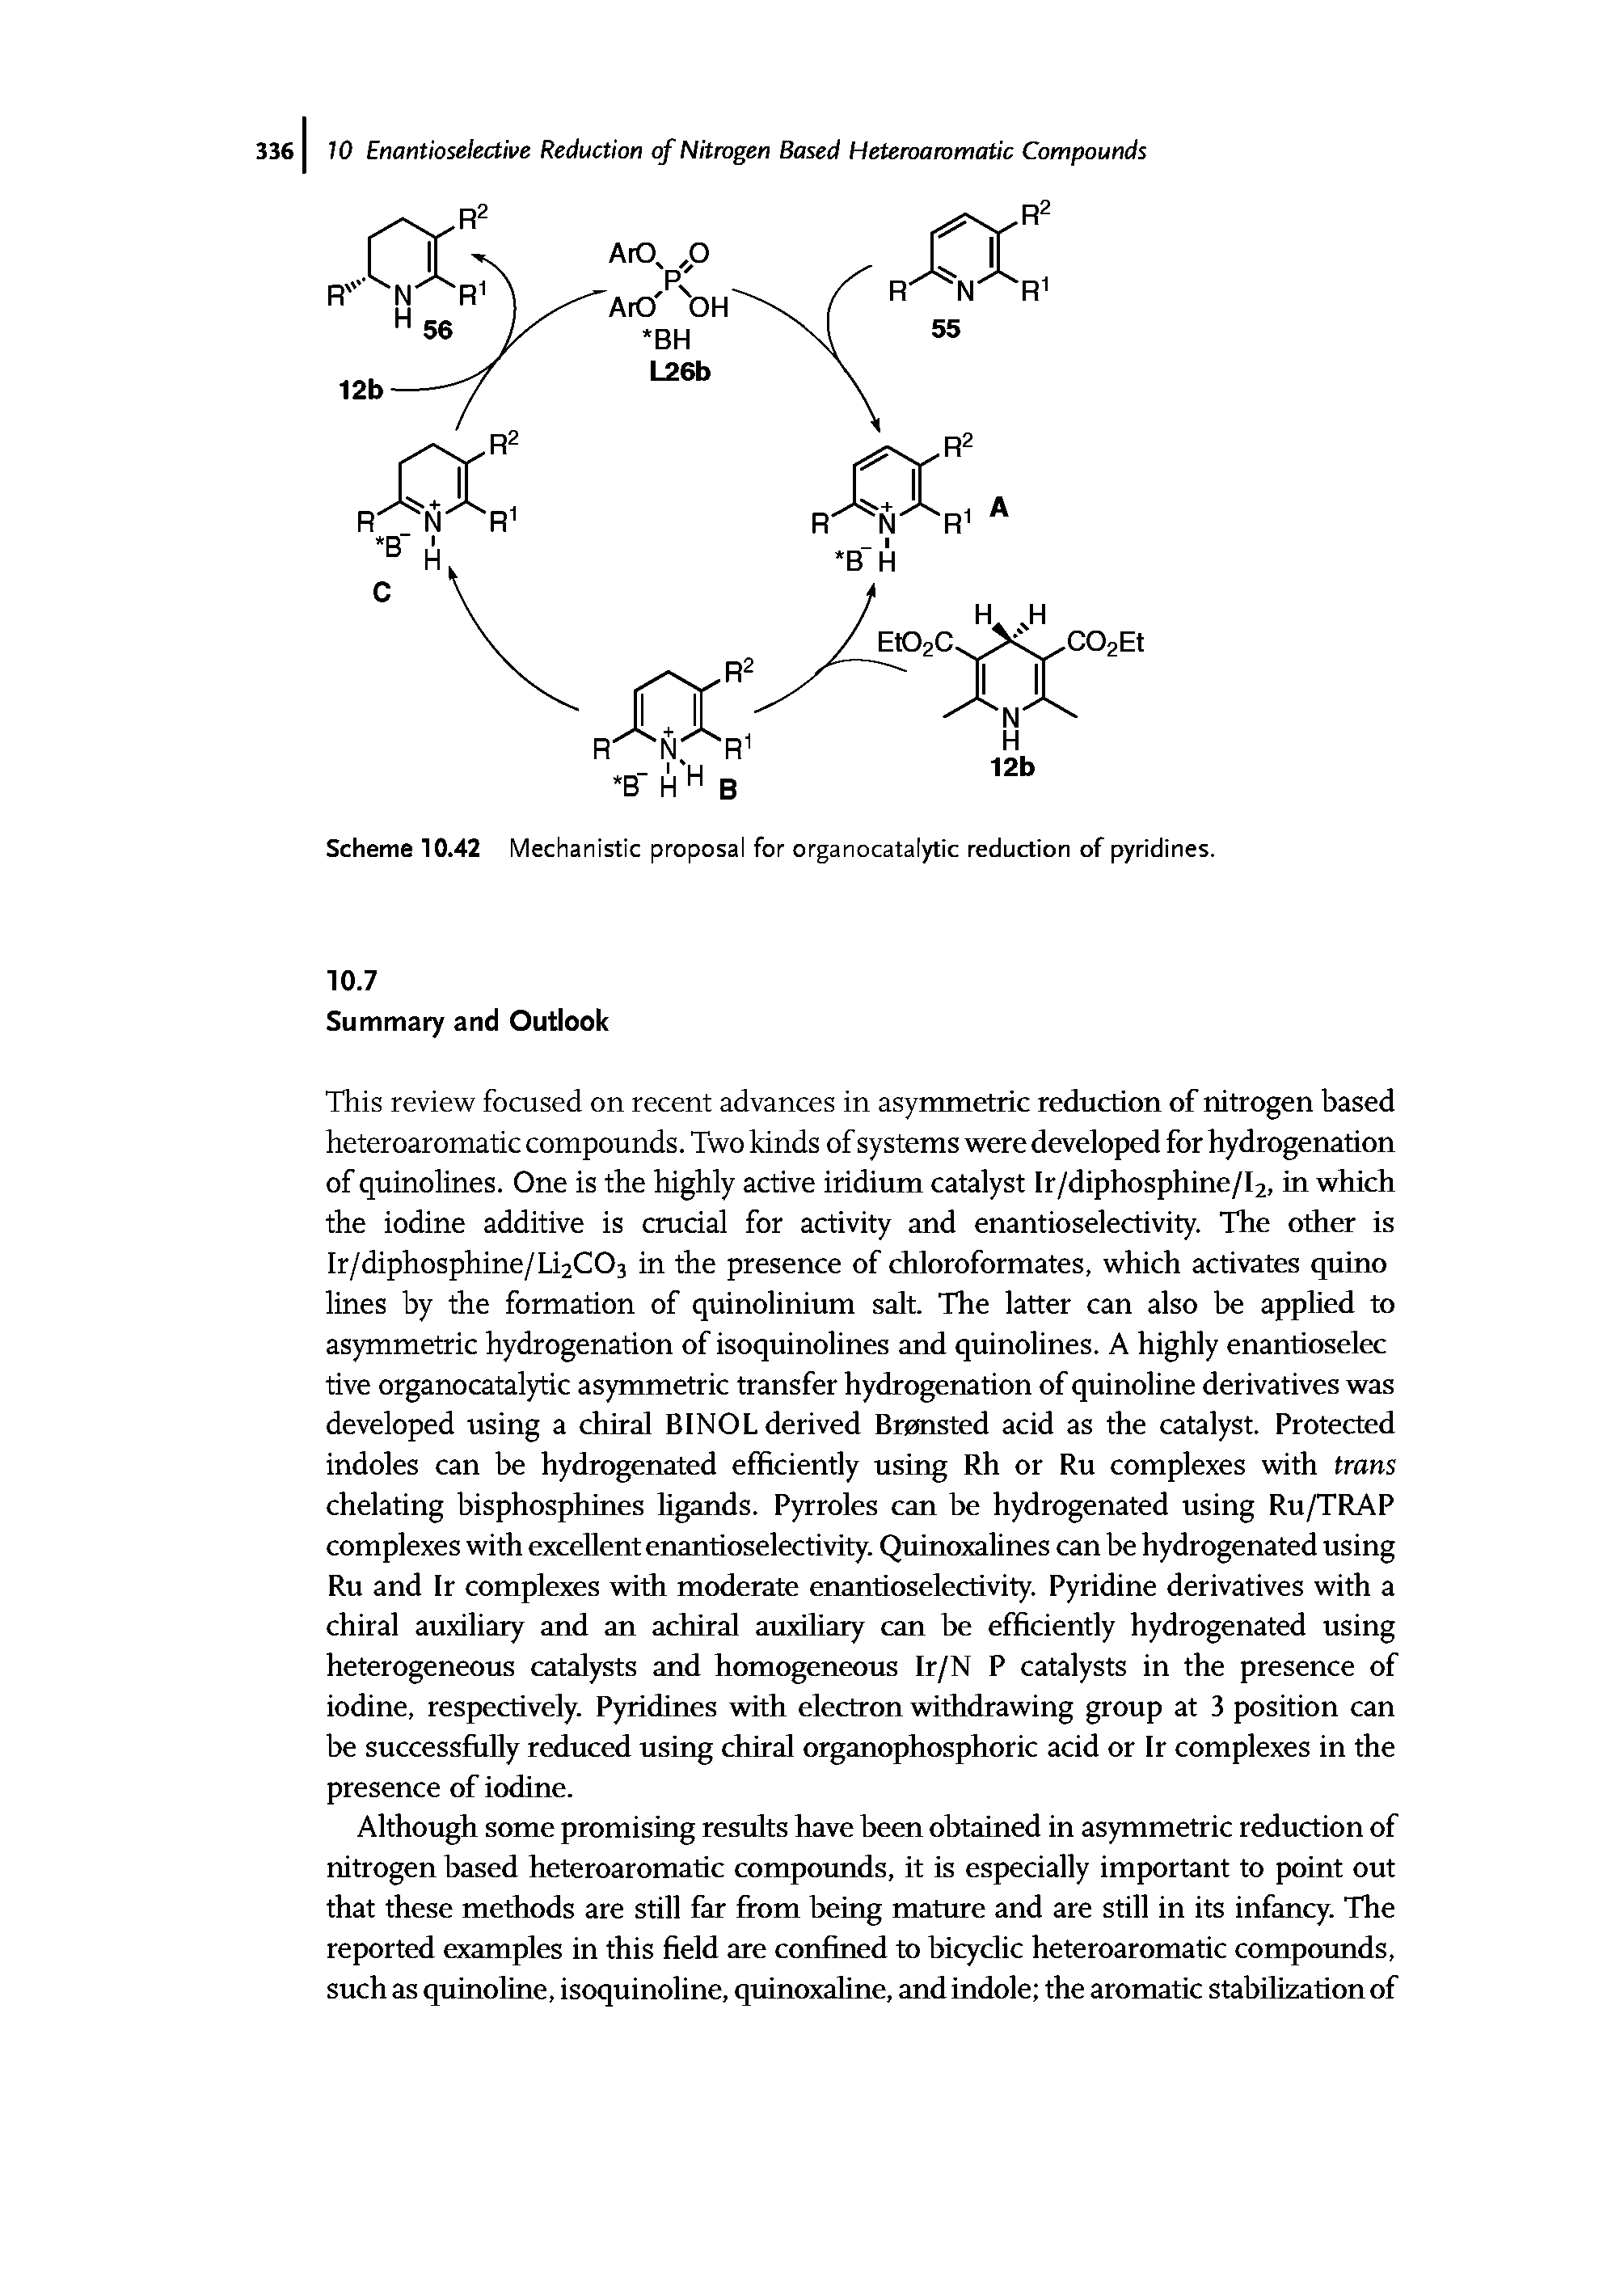 Scheme 10.42 Mechanistic proposal for organocatalytic reduction of pyridines.